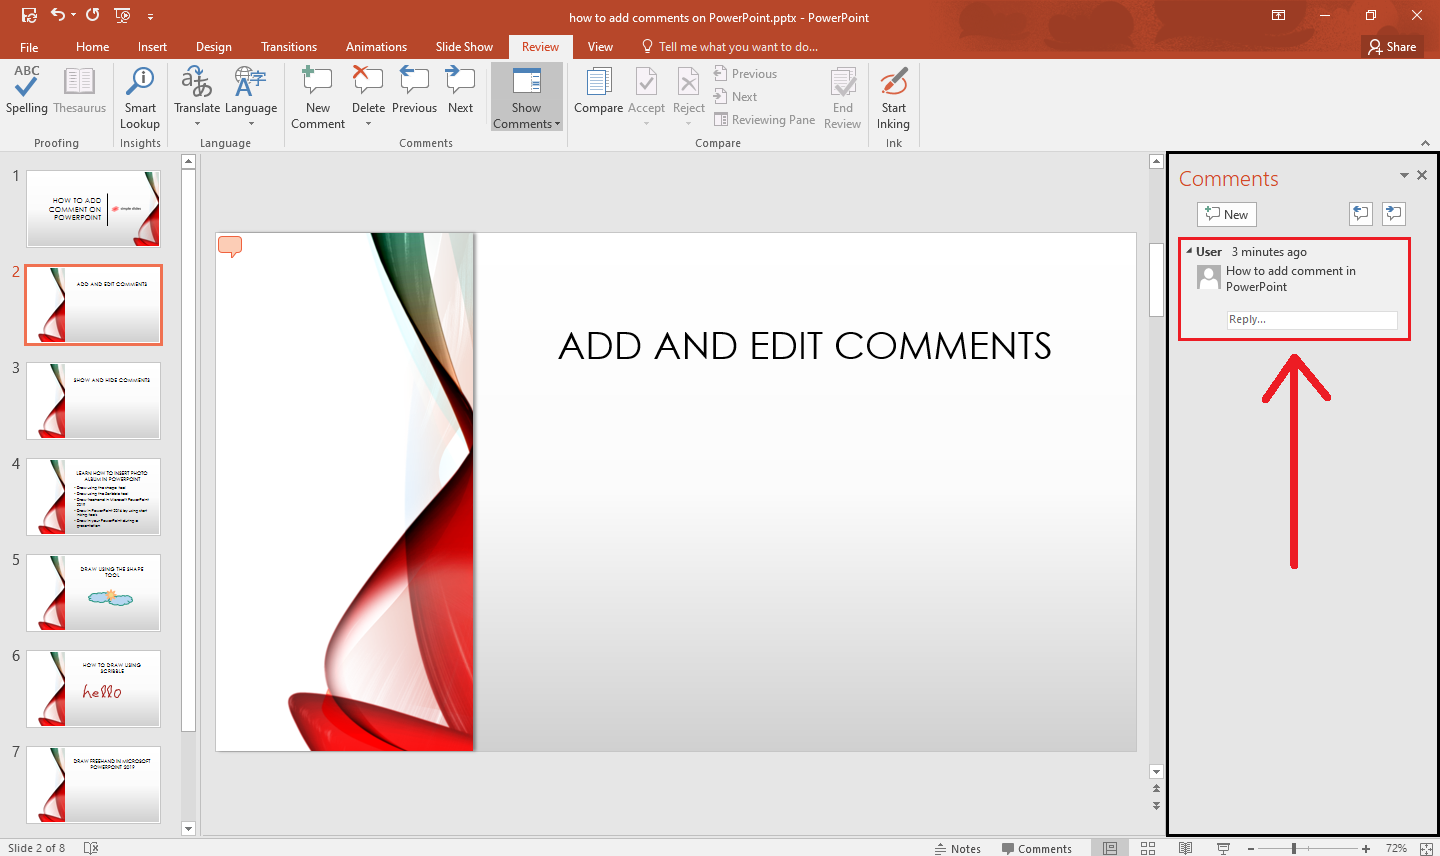 after done typing, press enter to save your new comment on PowerPoint.